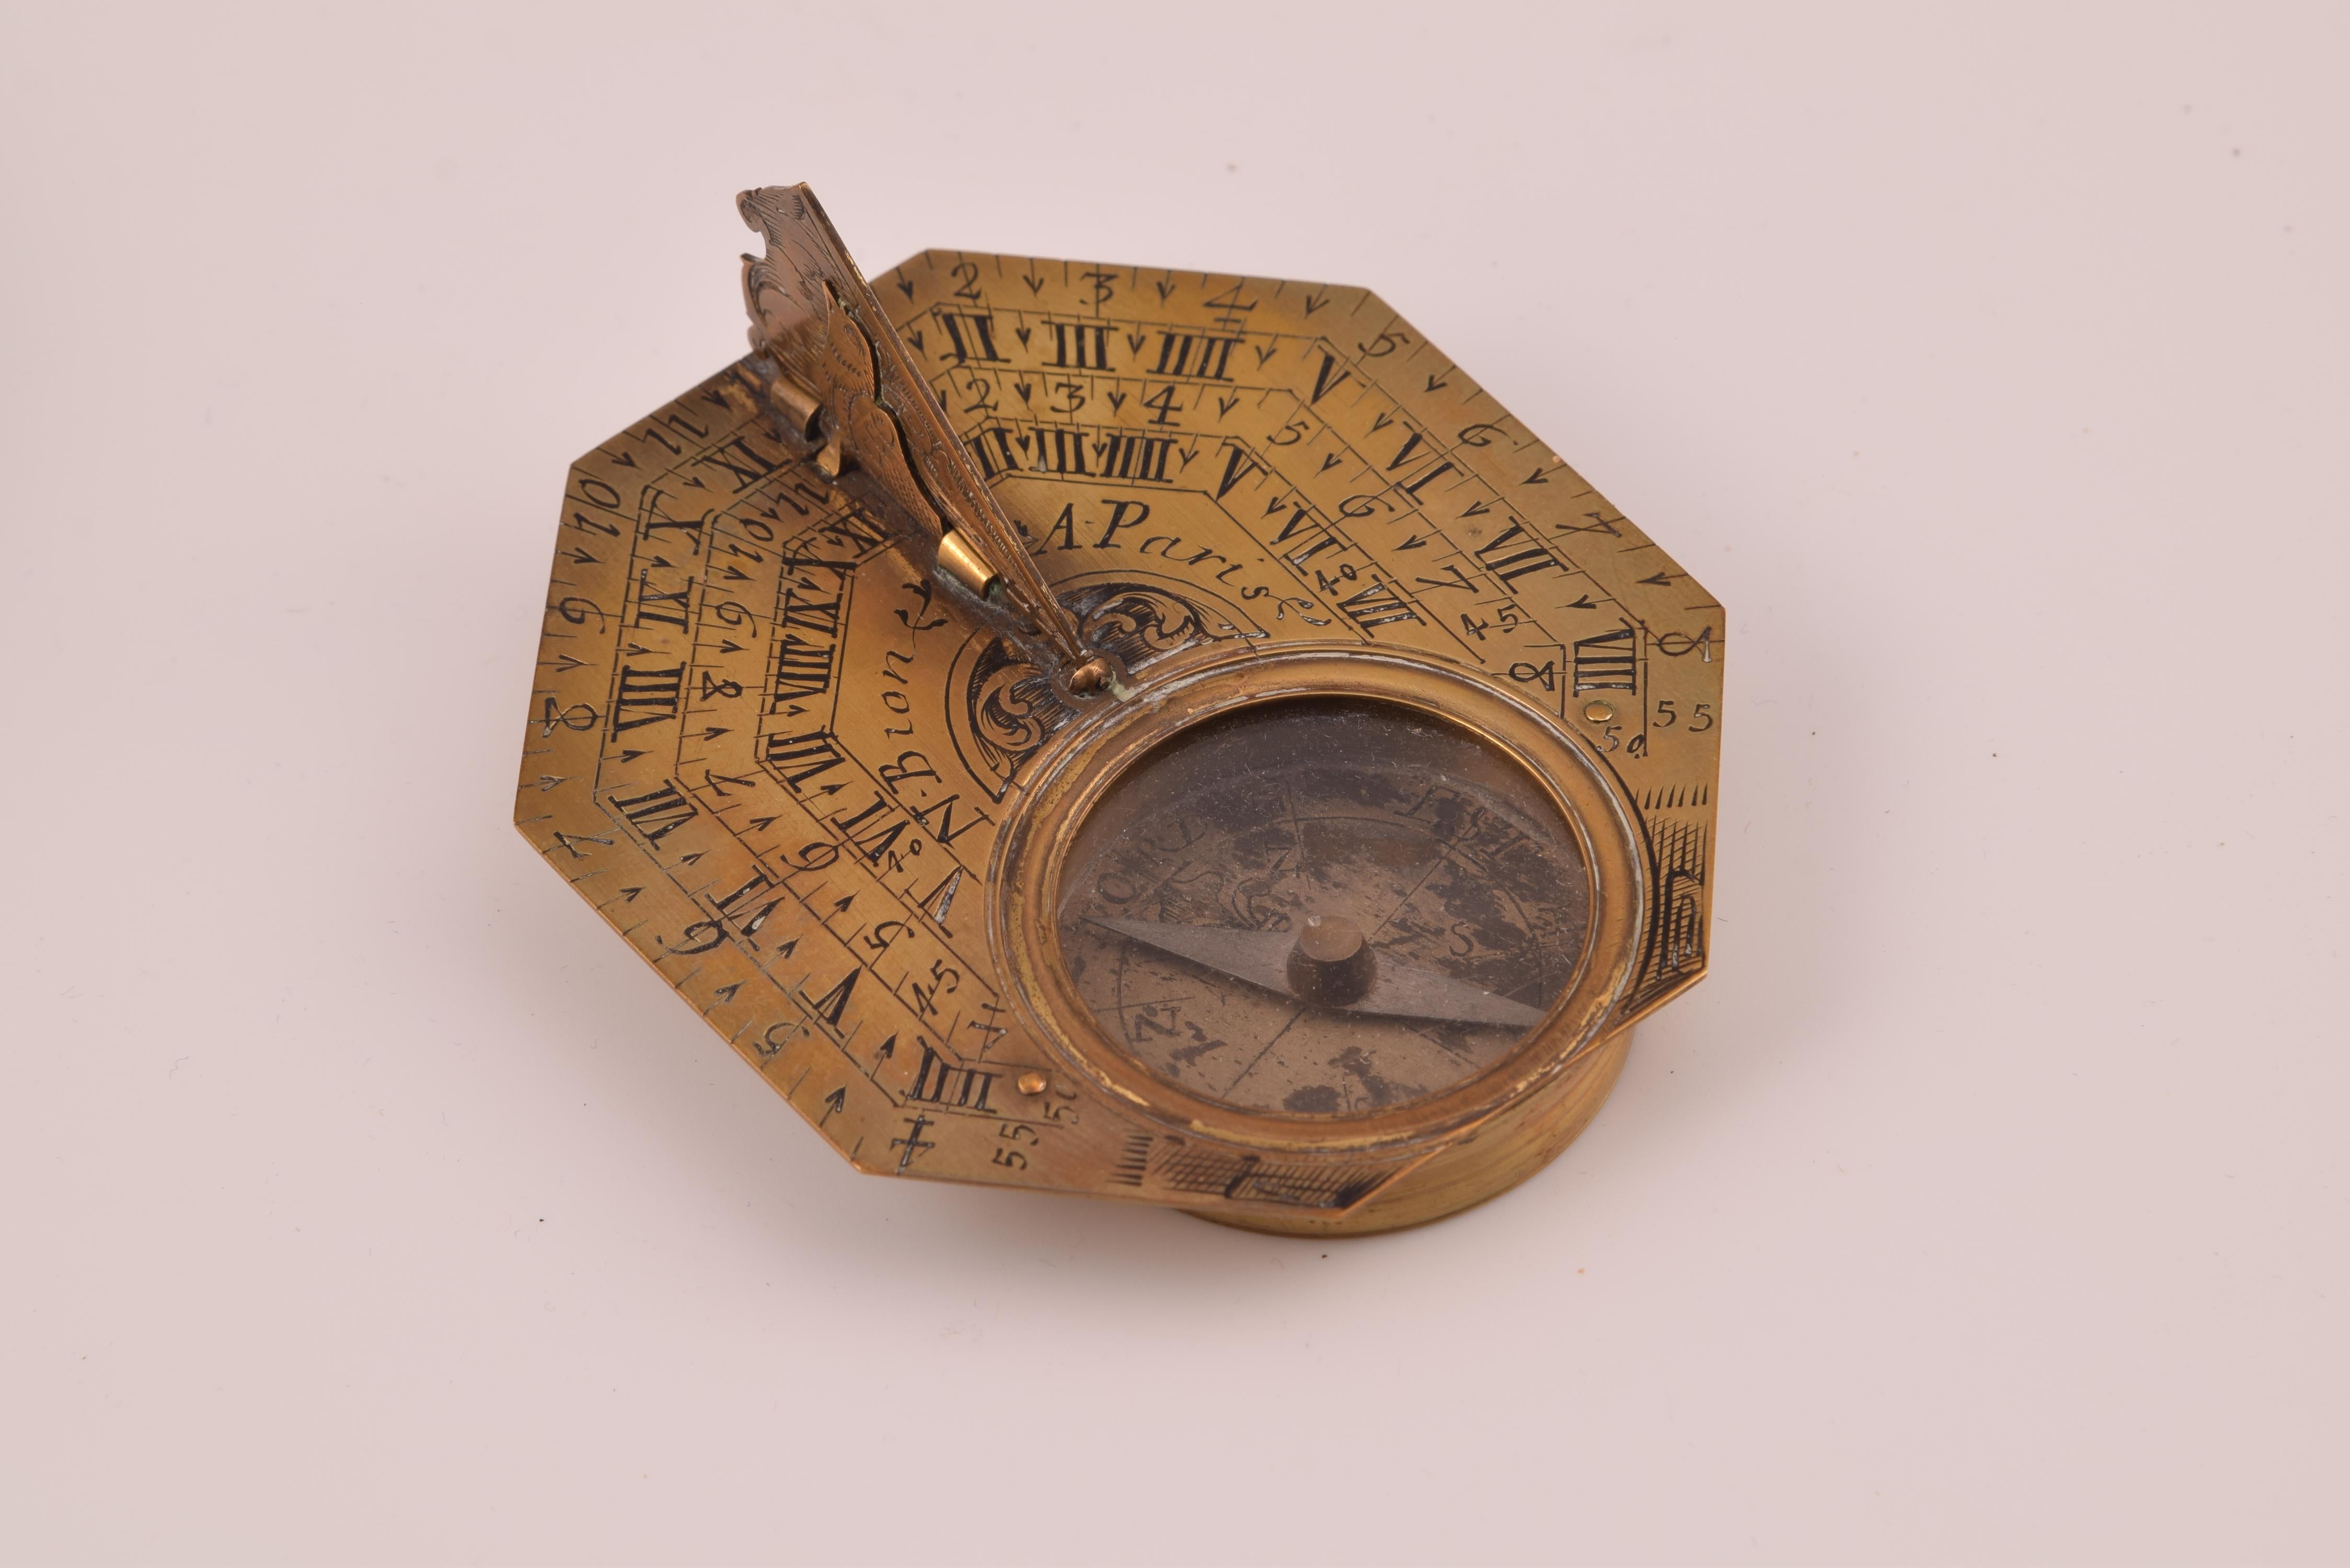 Sundial with compass and case. Bronze. BION, Nicholas. Paris, 18th century. 
Polygonal sundial with a bird-shaped gnomon and engraved triangular piece, which presents, on one side, a compass with a needle with triangular ends. The name of the